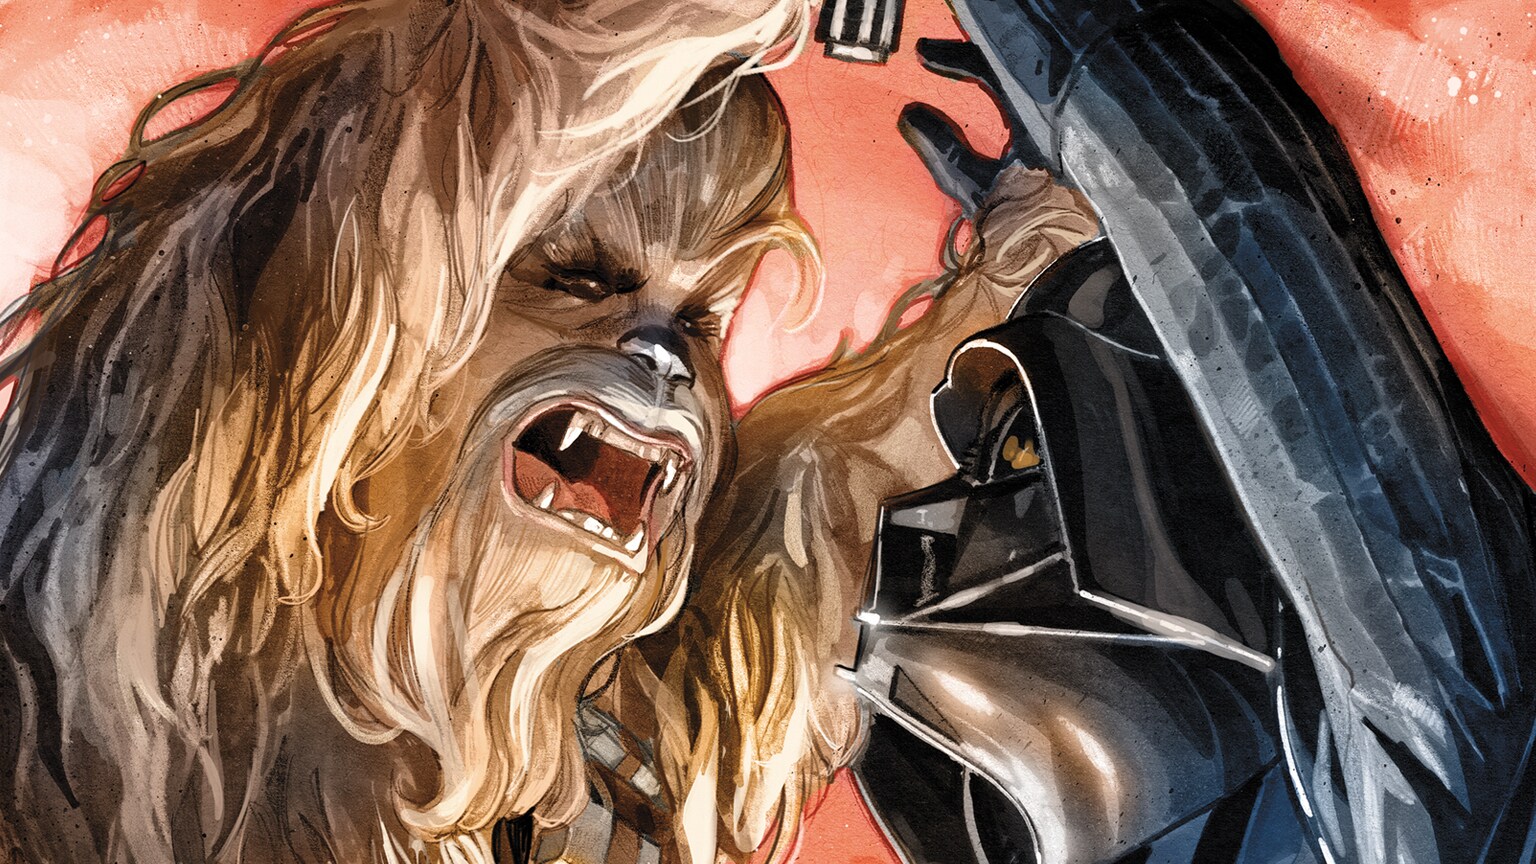 It’s Rebels and Rogues Versus the Empire in Marvel’s Star Wars #74 - Exclusive